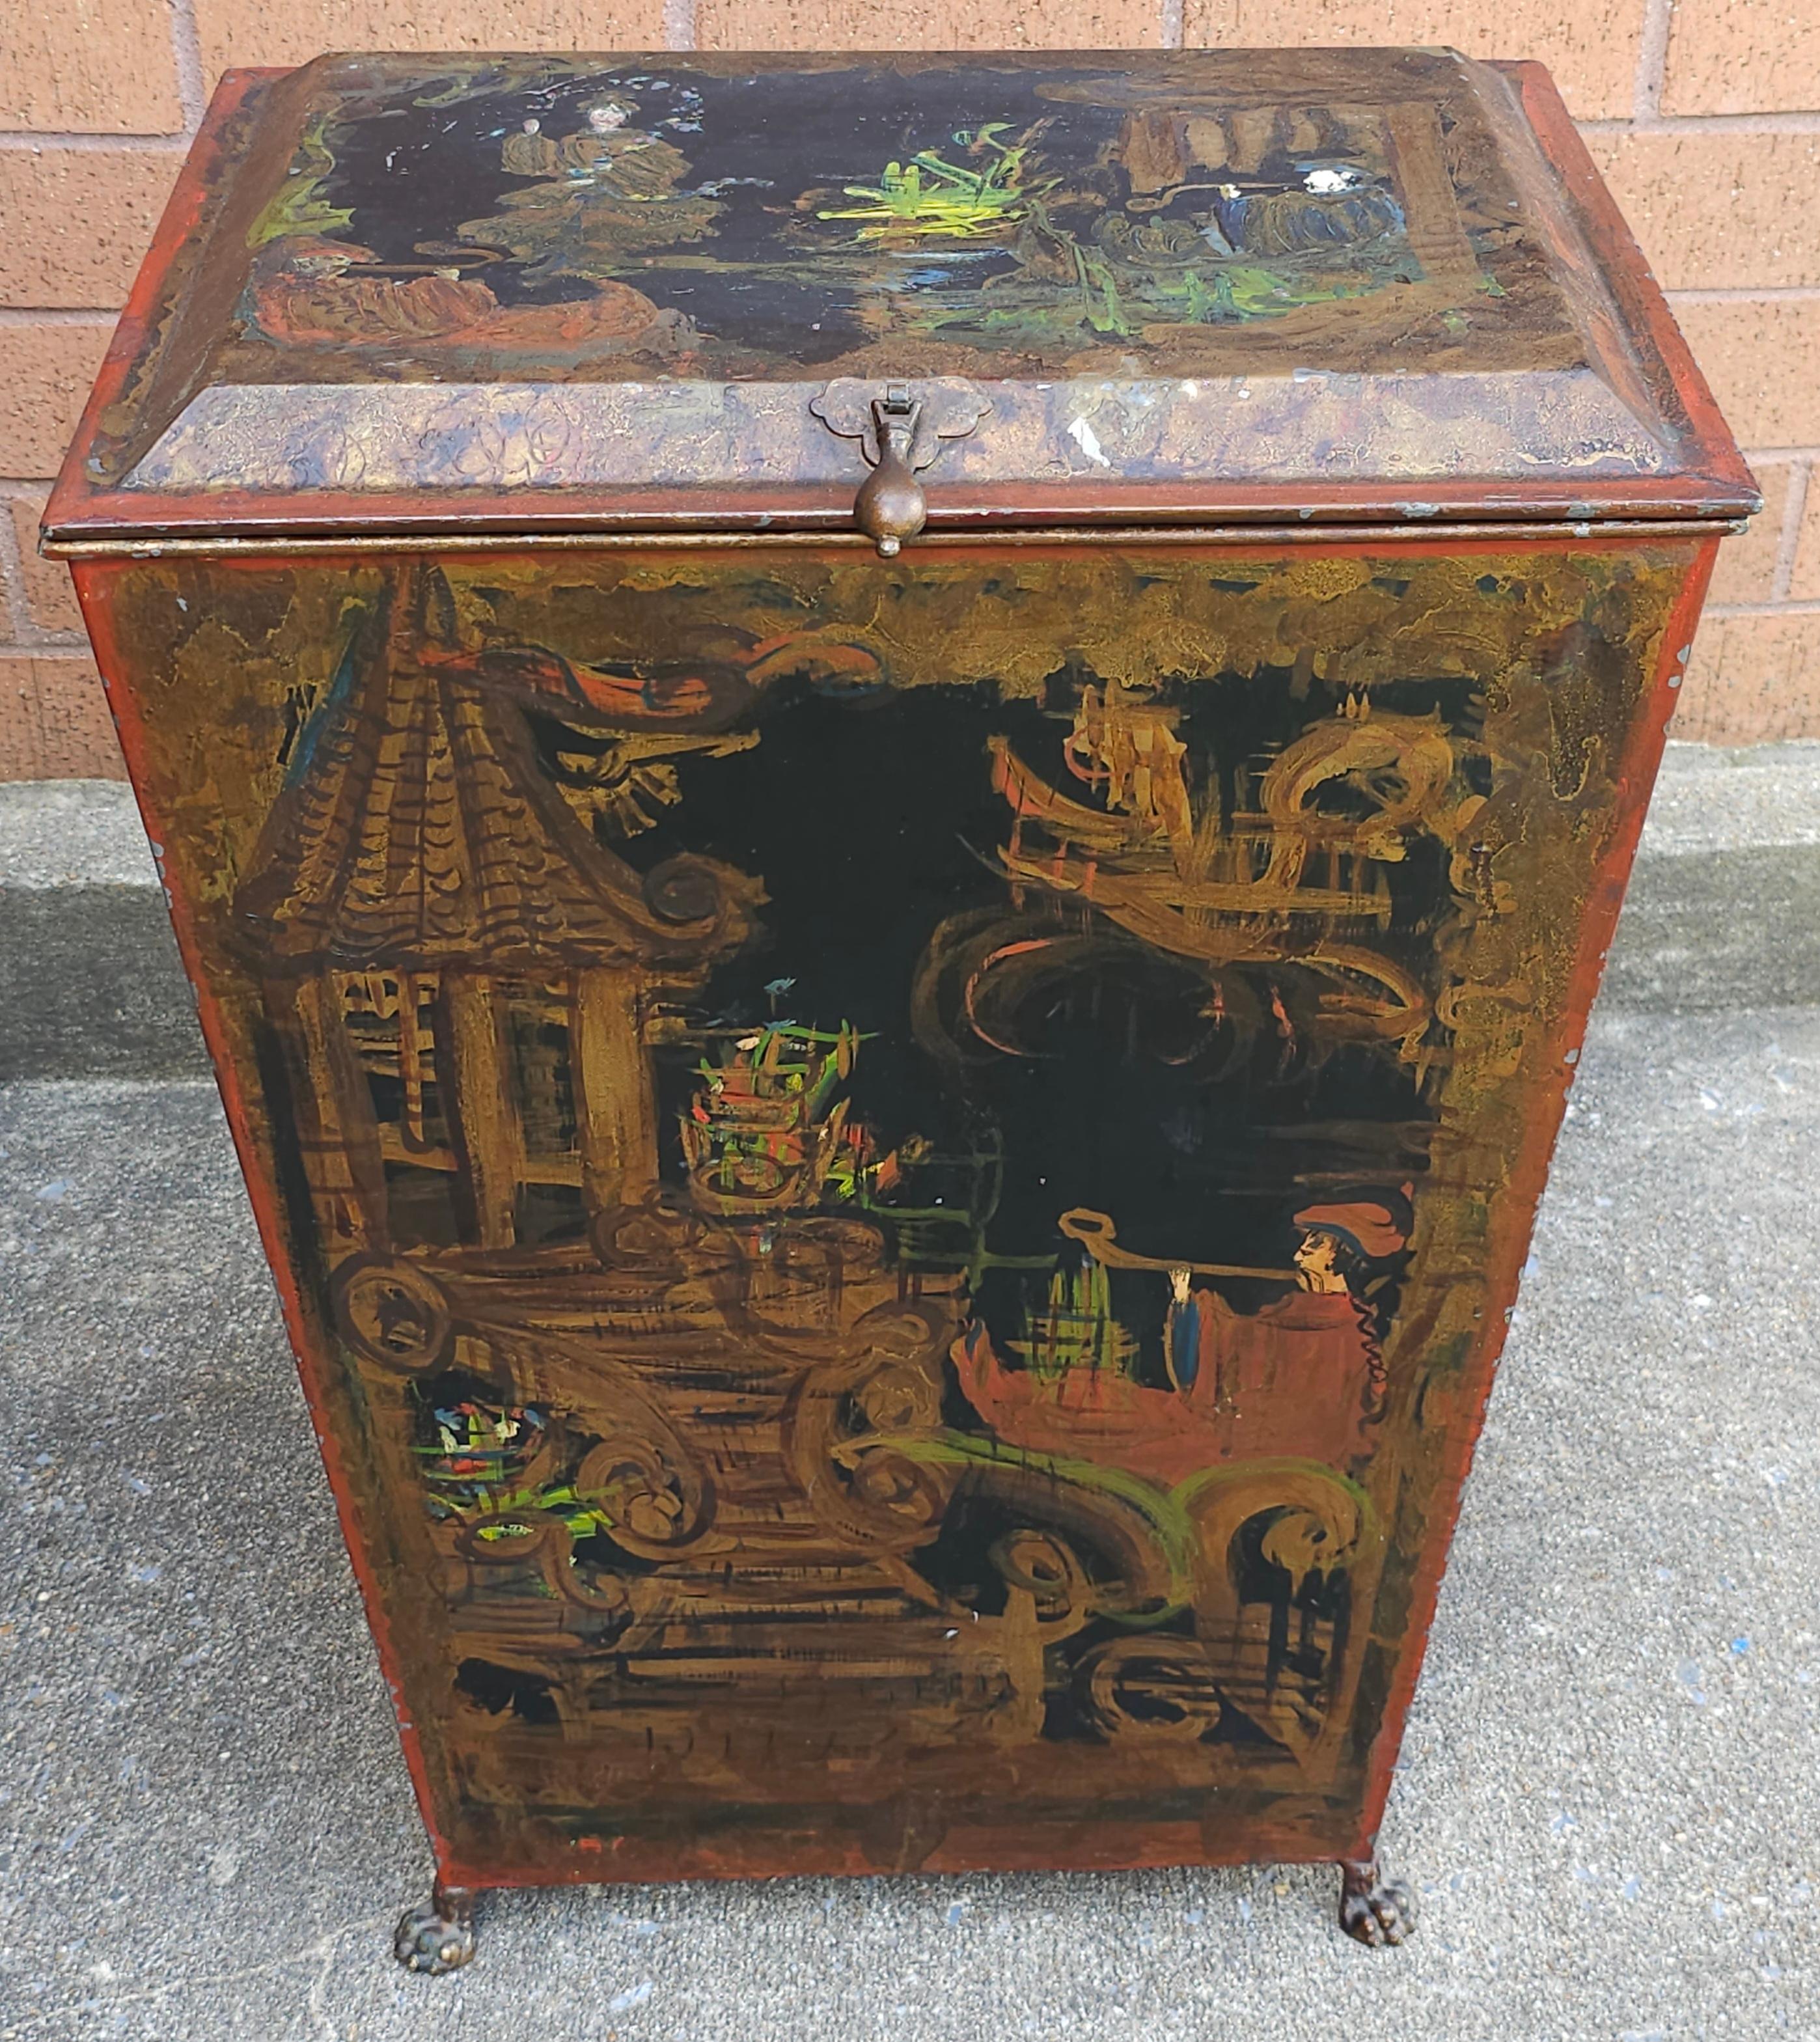 A Victorian Hand Painted Black Japanned Tole Fuel Bucket, circa late 19th Century.
Measures 17.25